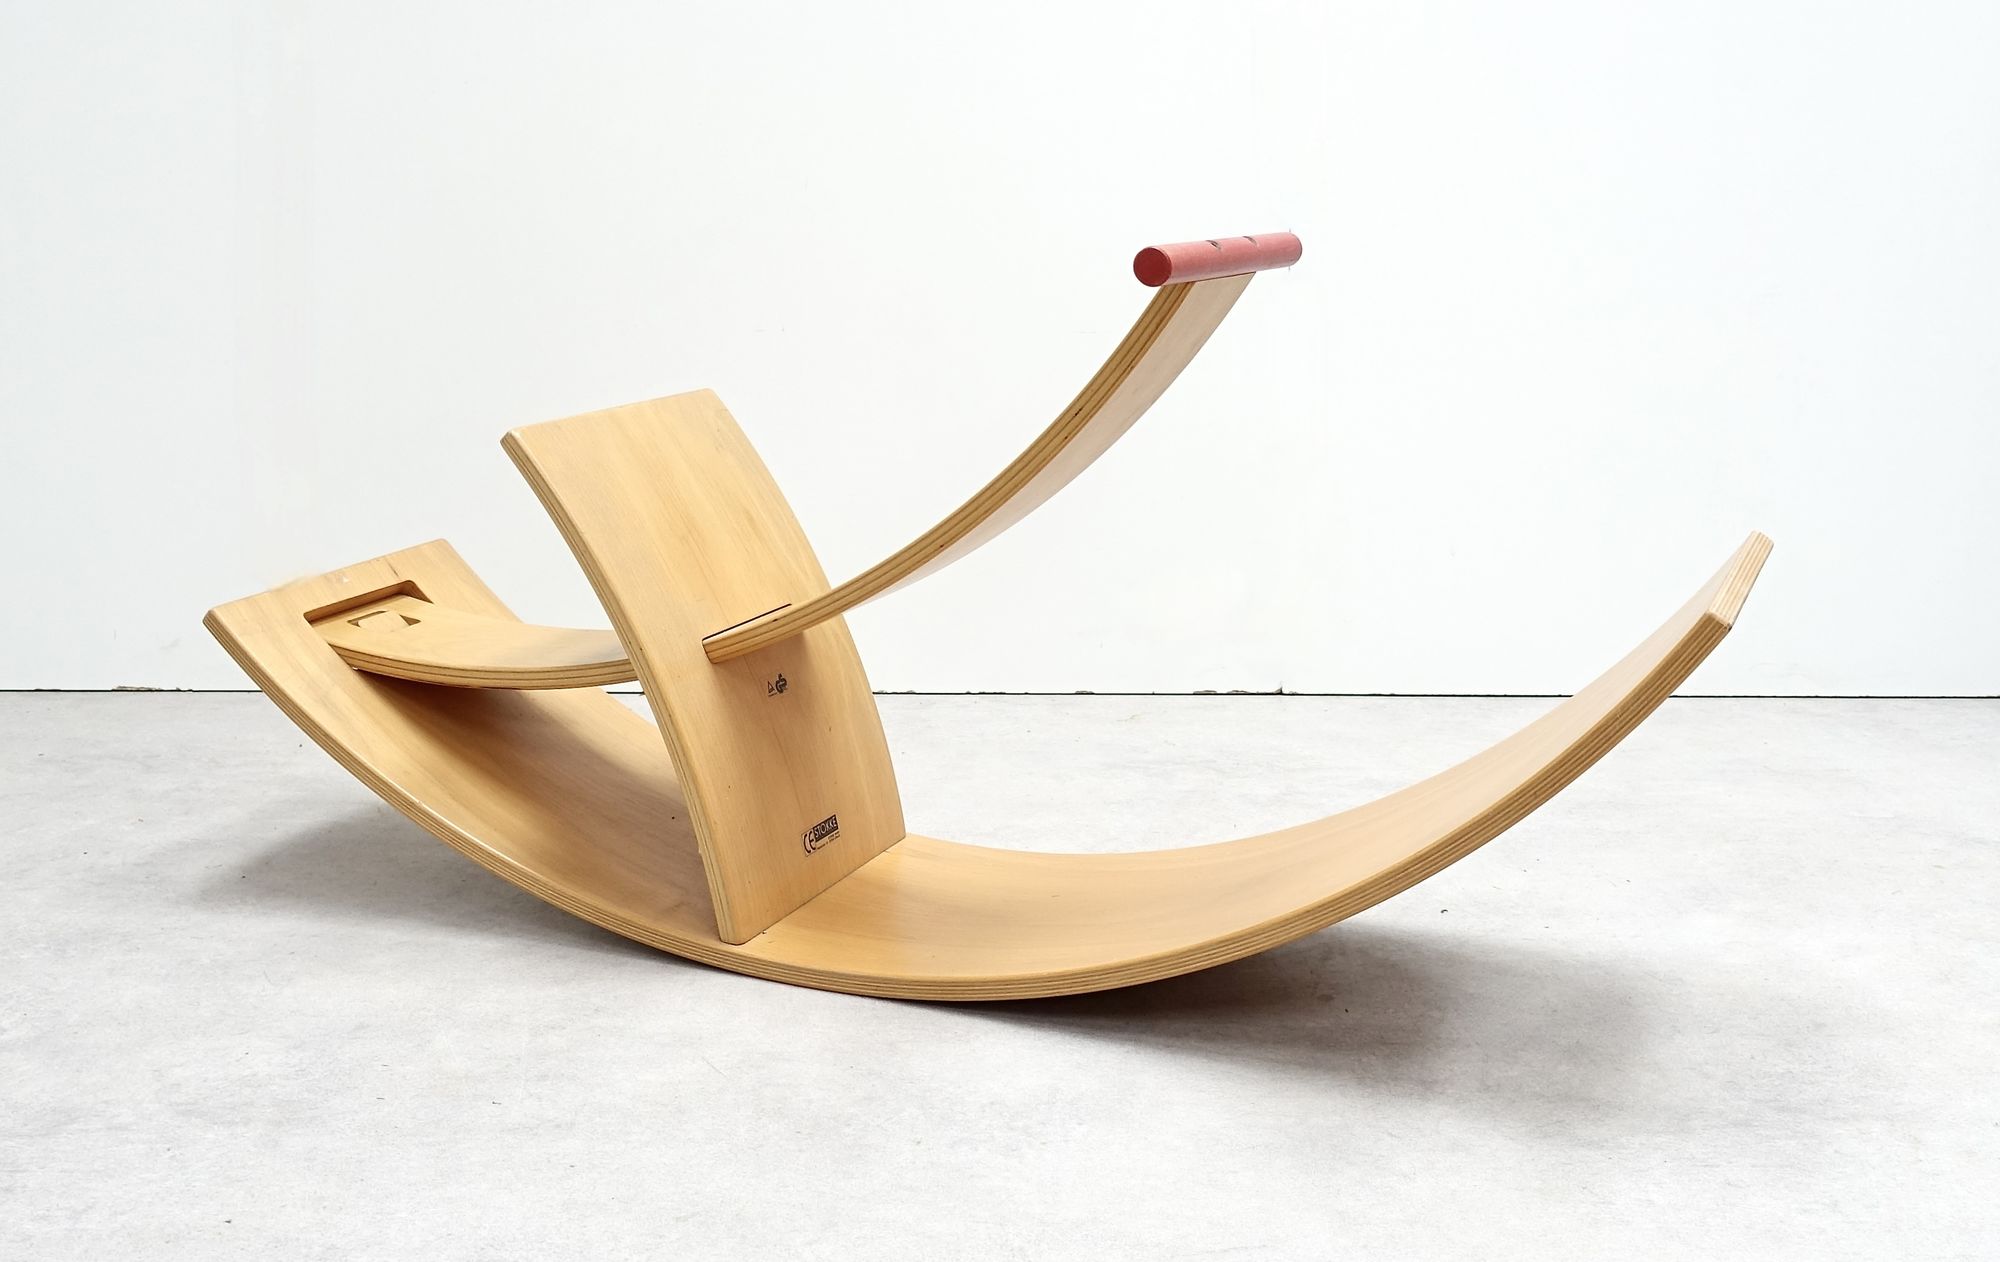 rocking chair of the brand Stokke